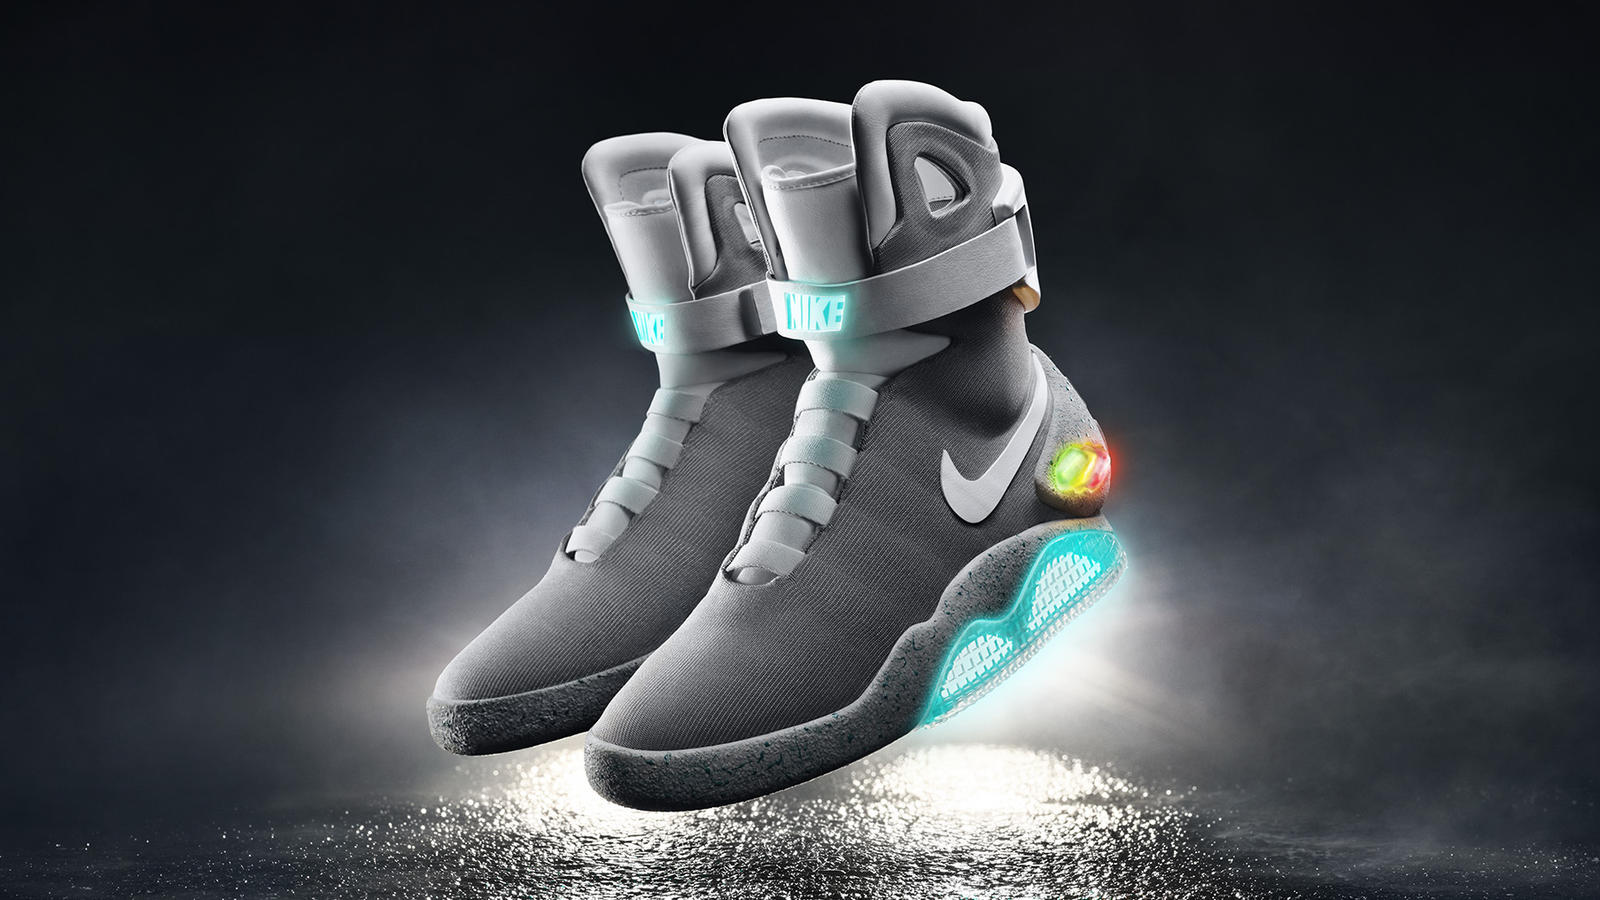 Nike Air Mag with Power Lace終極現身